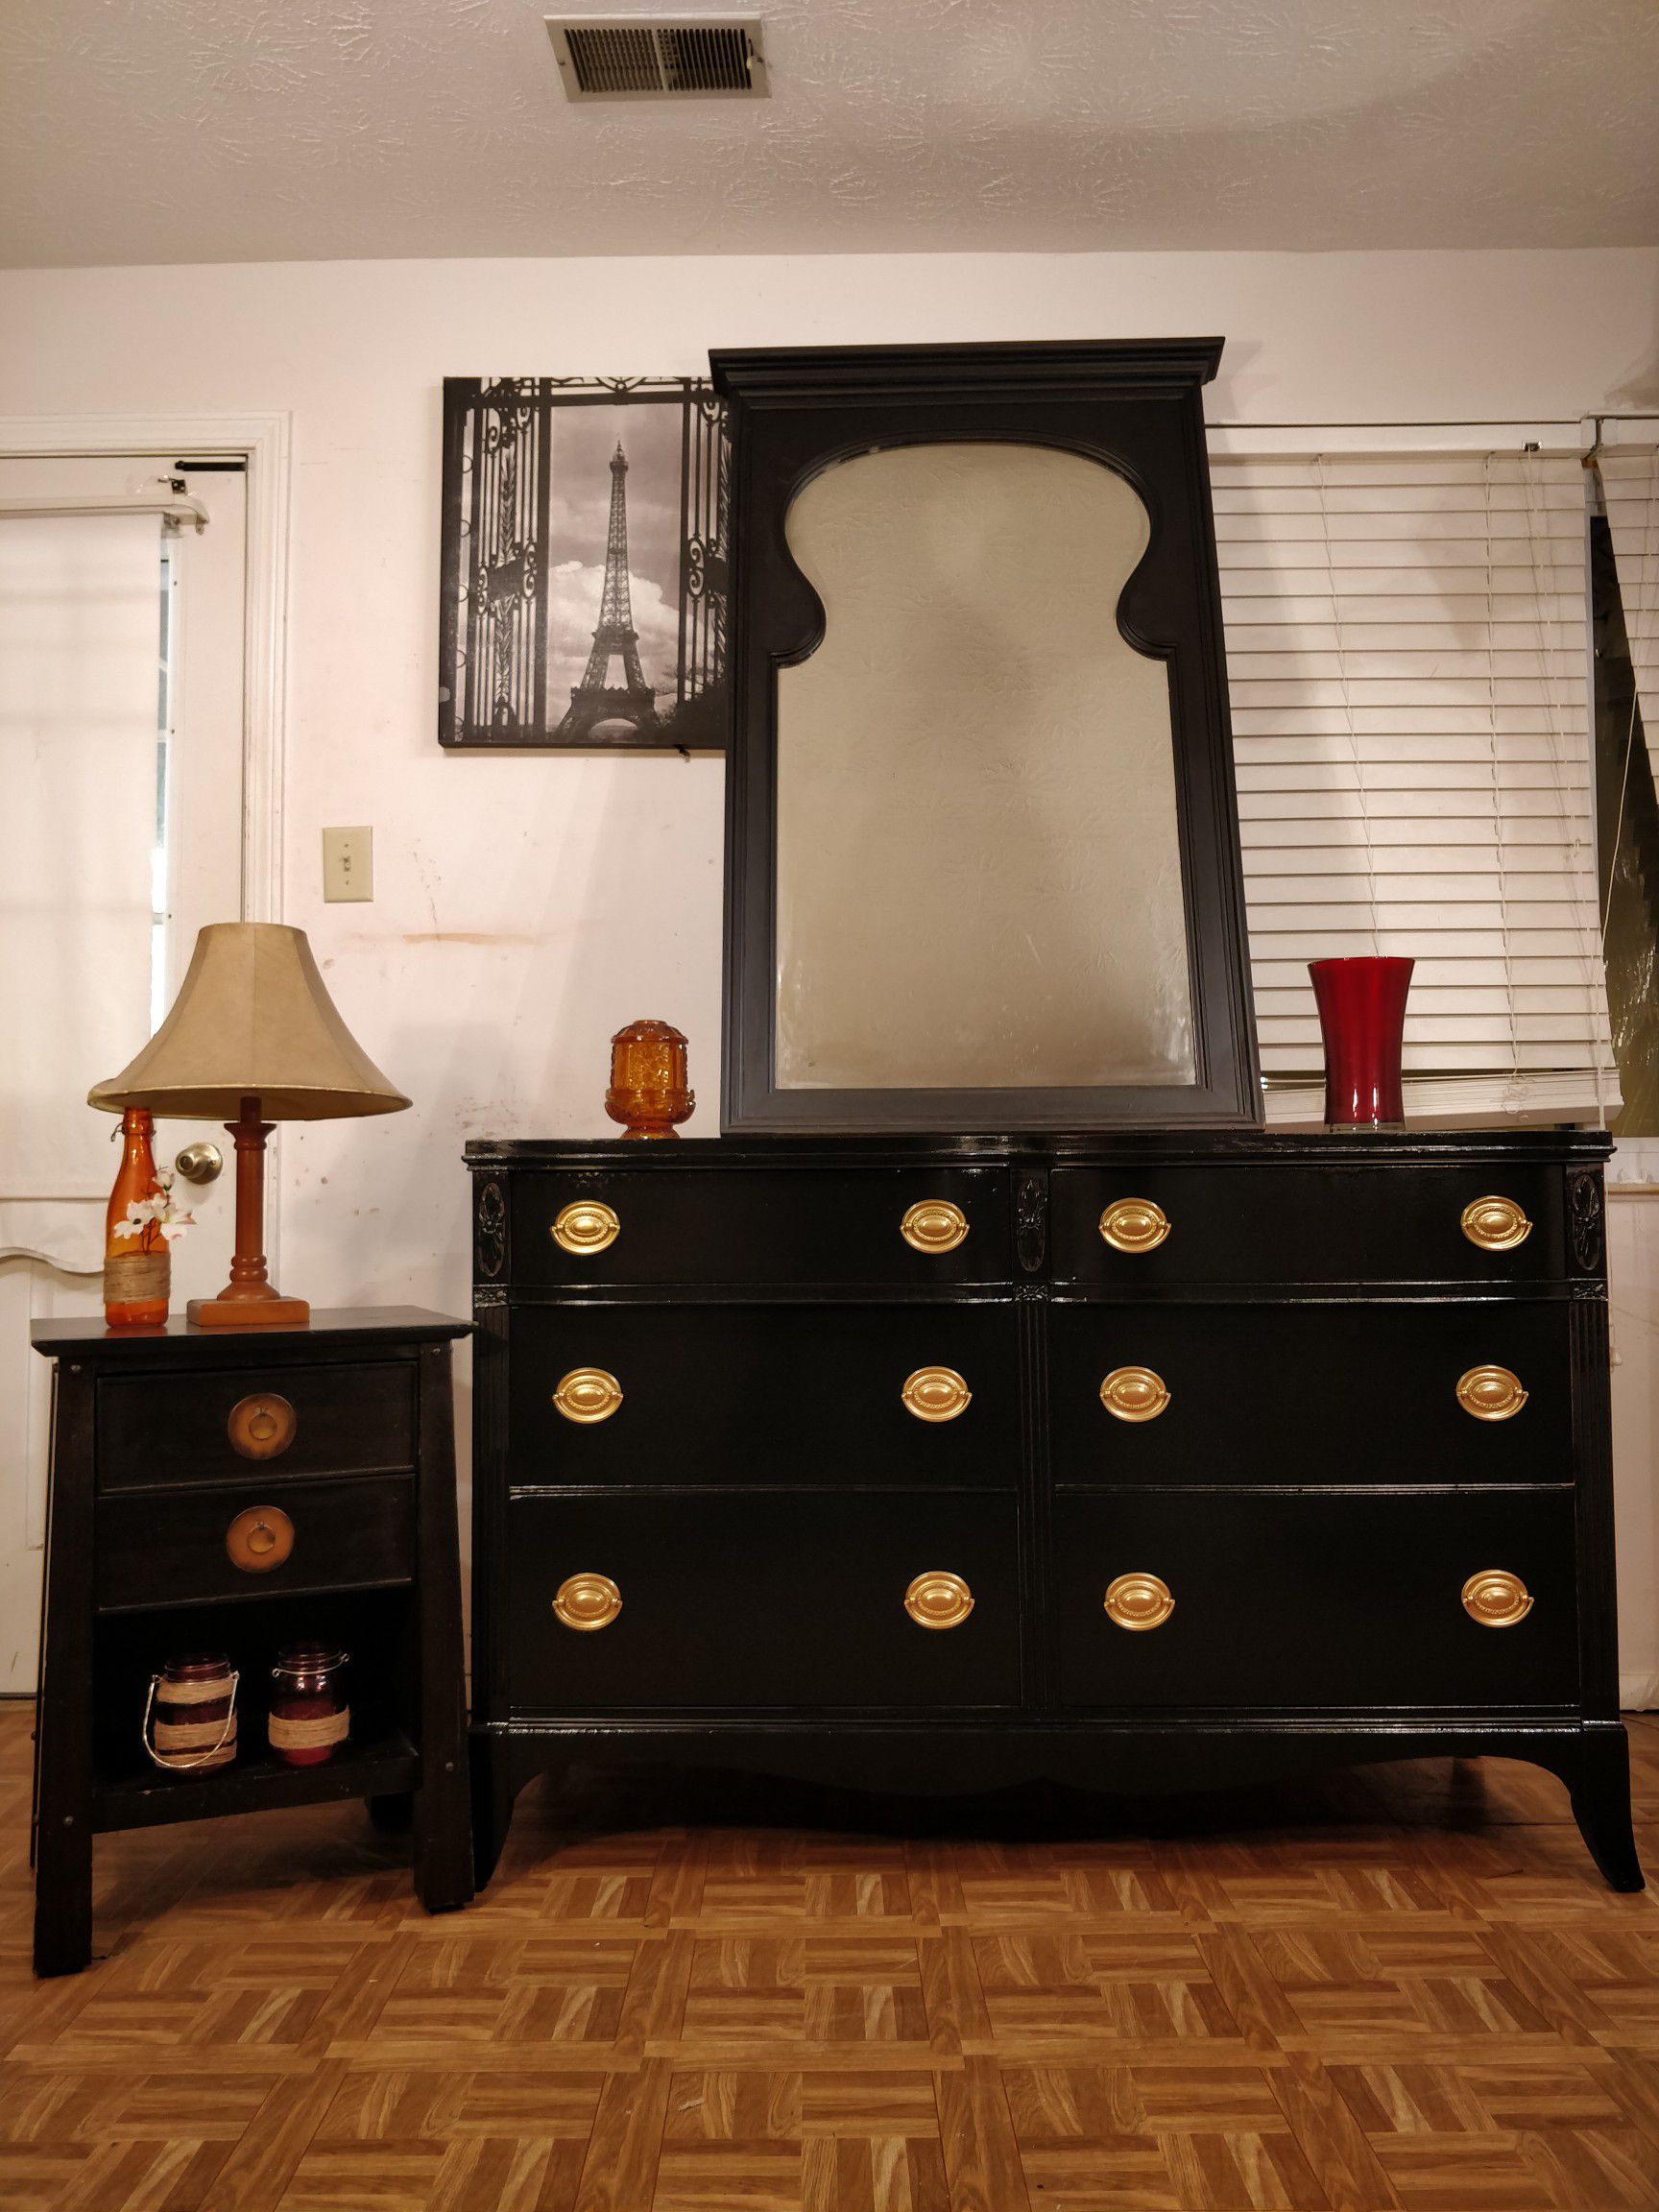 Nice antique black solid wood HUNTLEY FURNITURE dresser with big mirror & night stand in good condition, all drawers working, pe